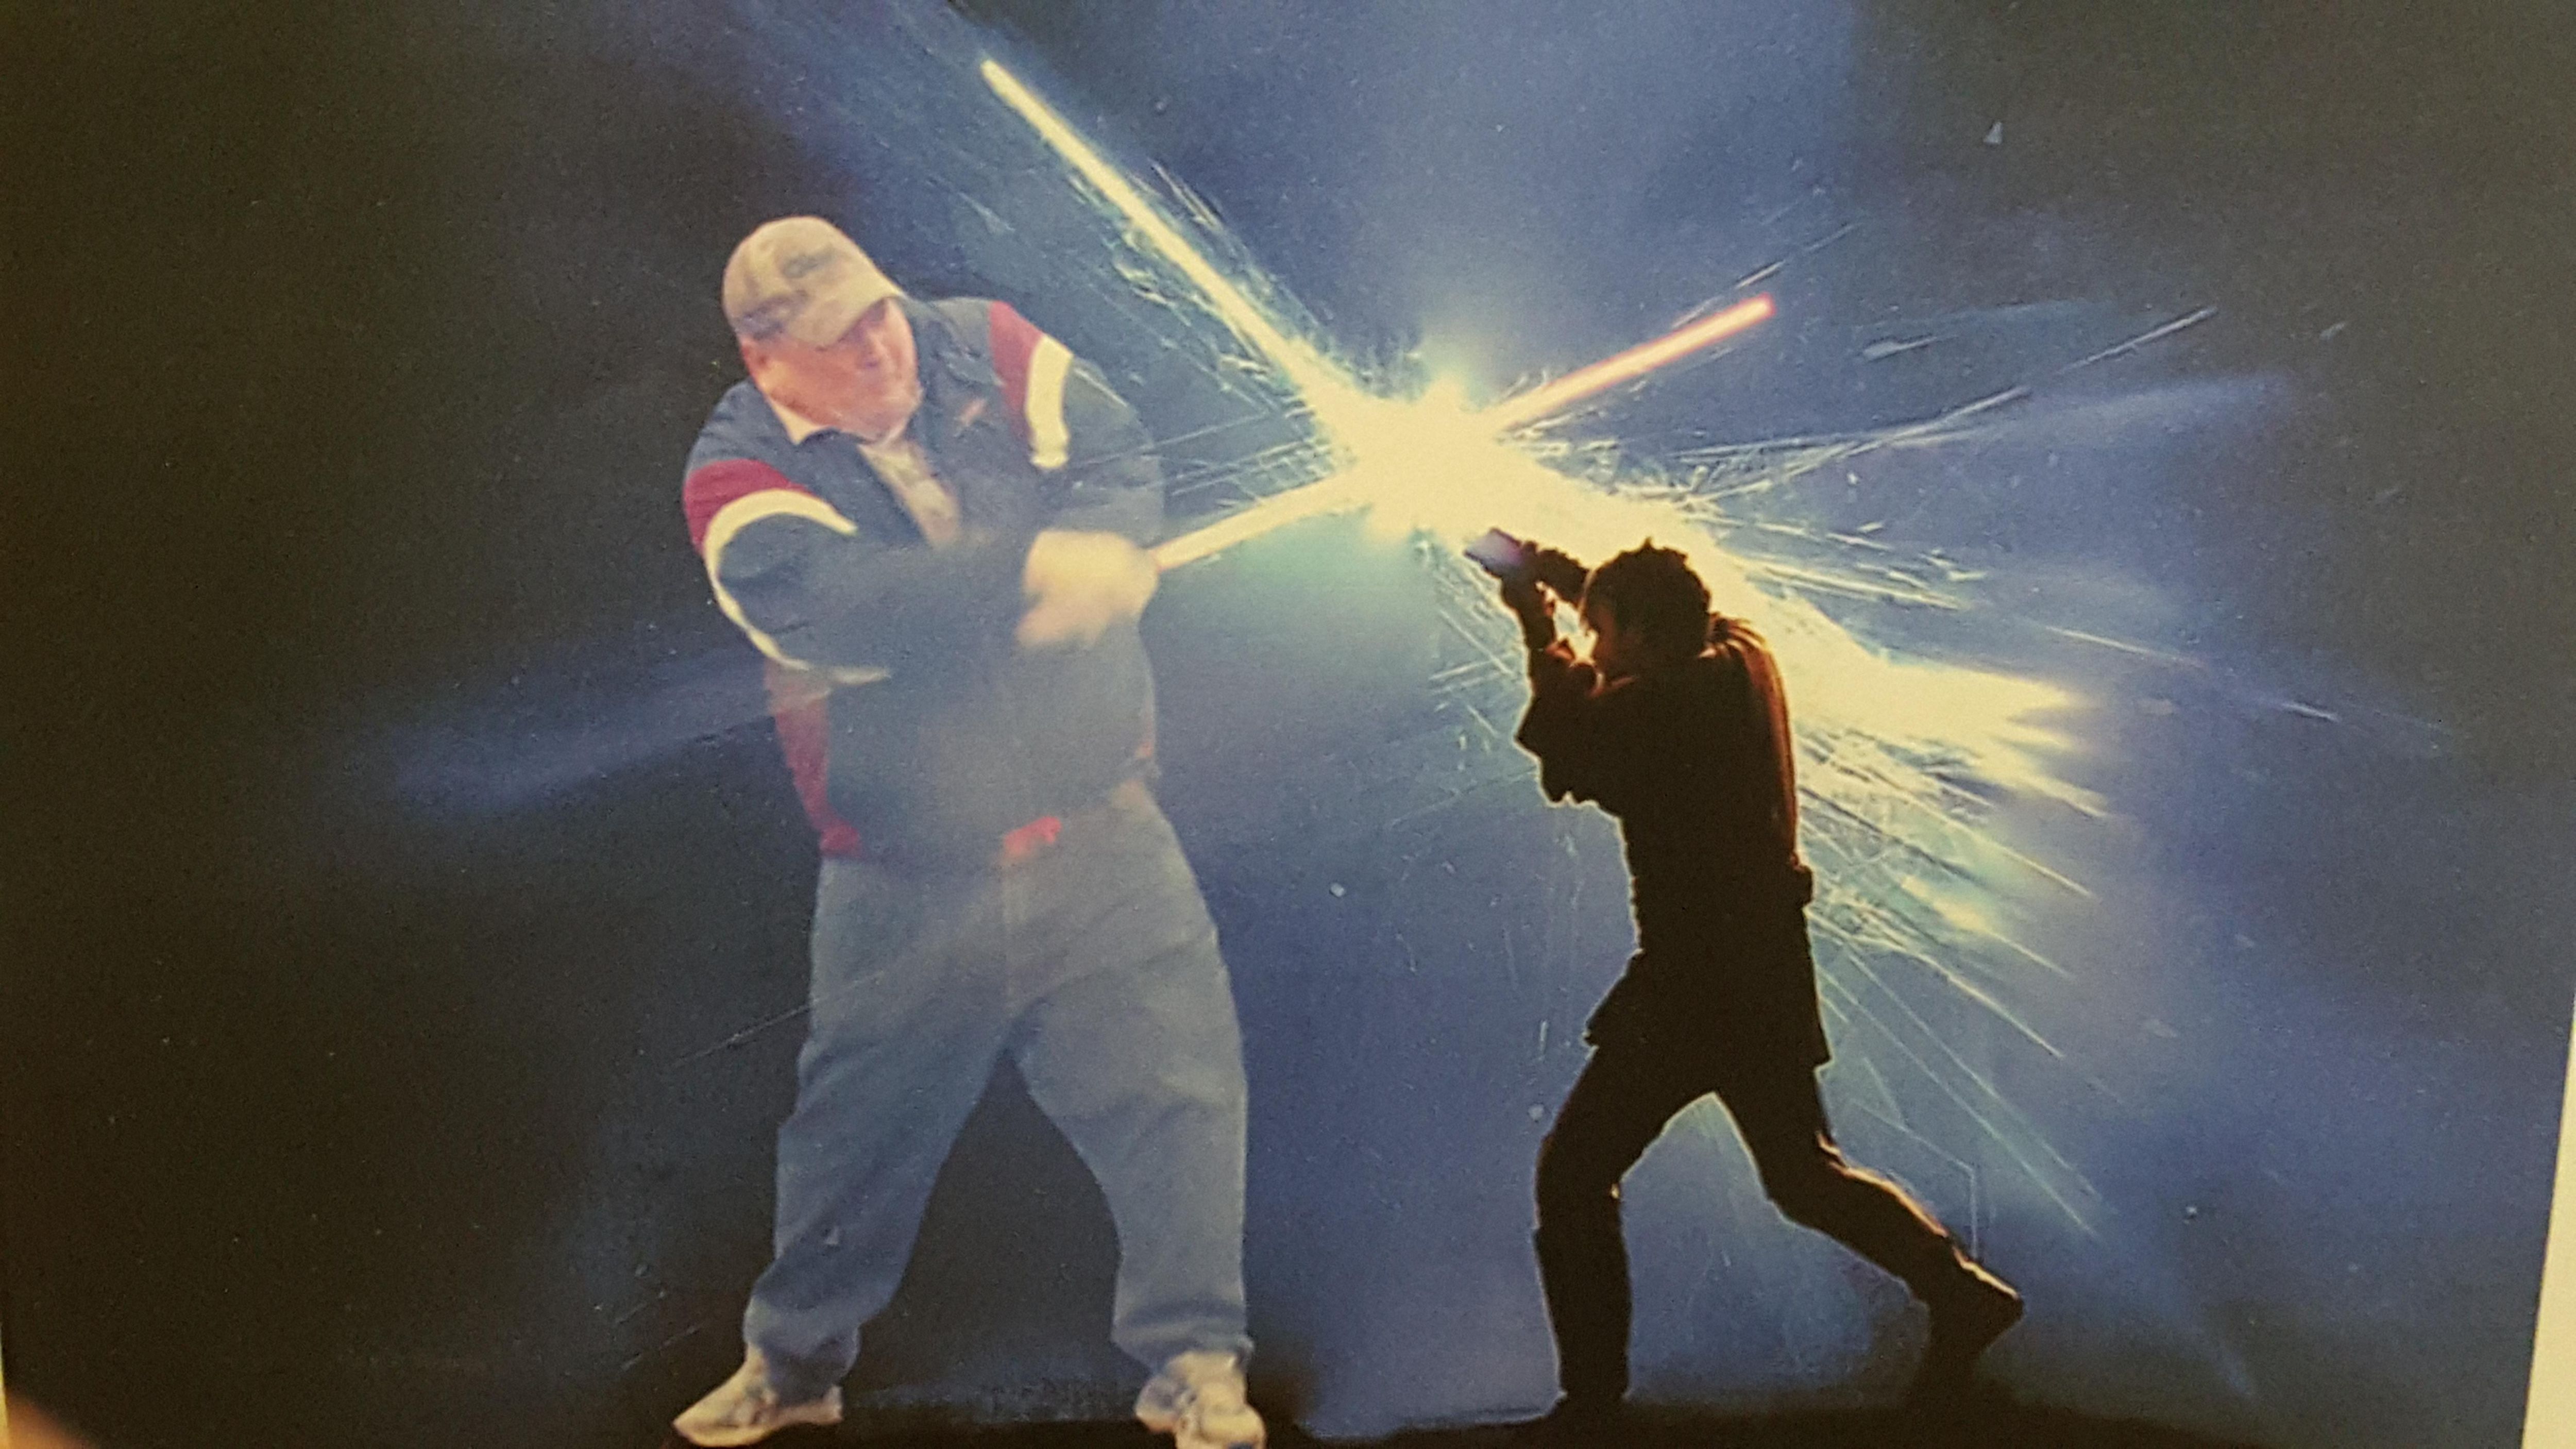 I tried to Photoshop one of my dad's terrible golf swings.